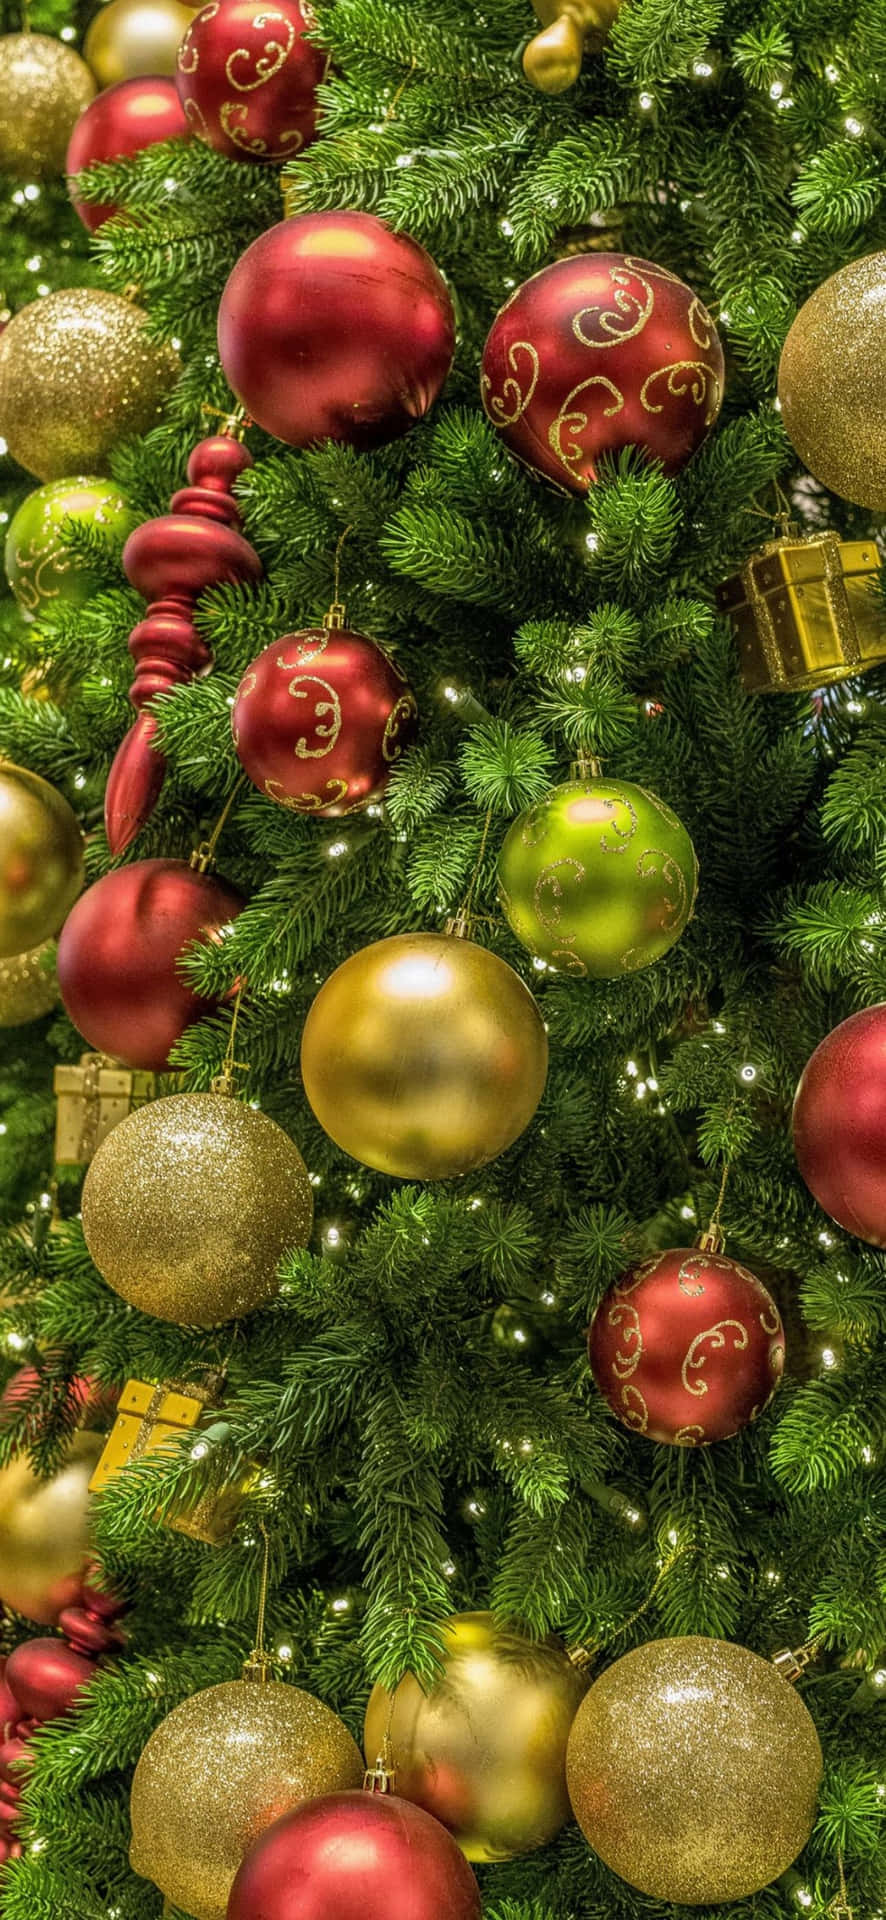 Get in the holiday mood with this festive Christmas-themed iPhone background.